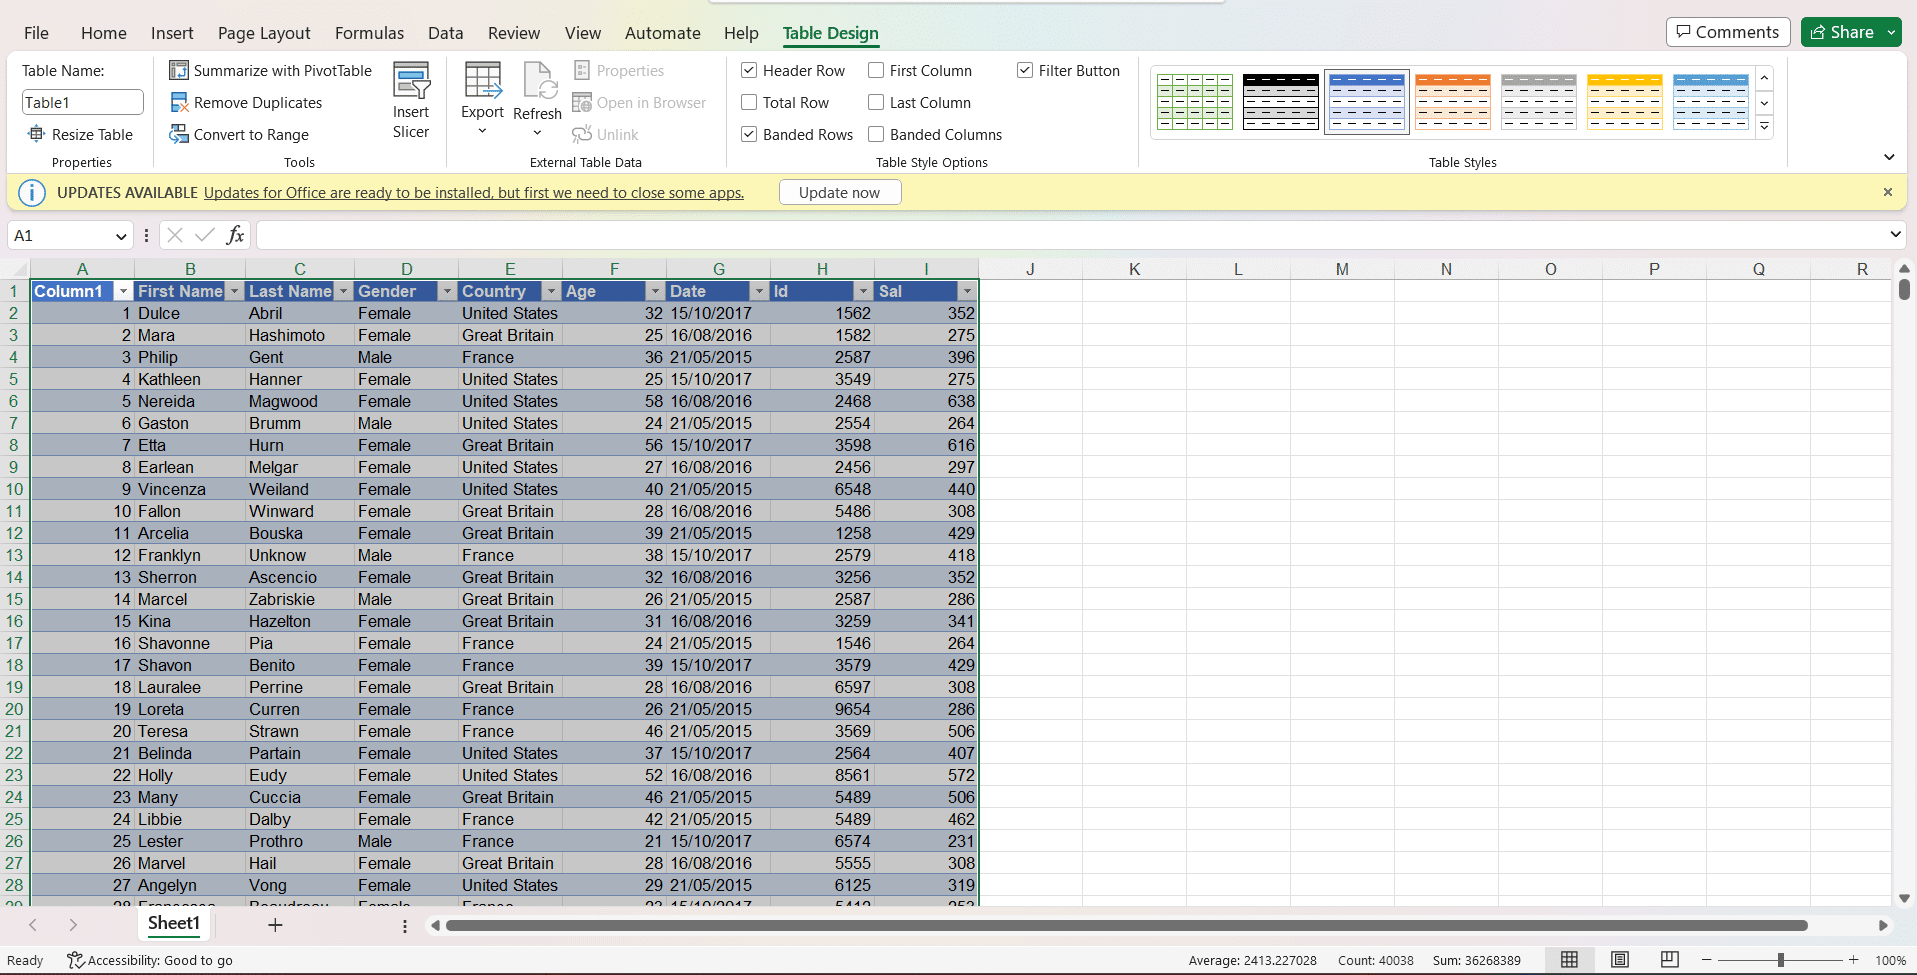 Data converted to table